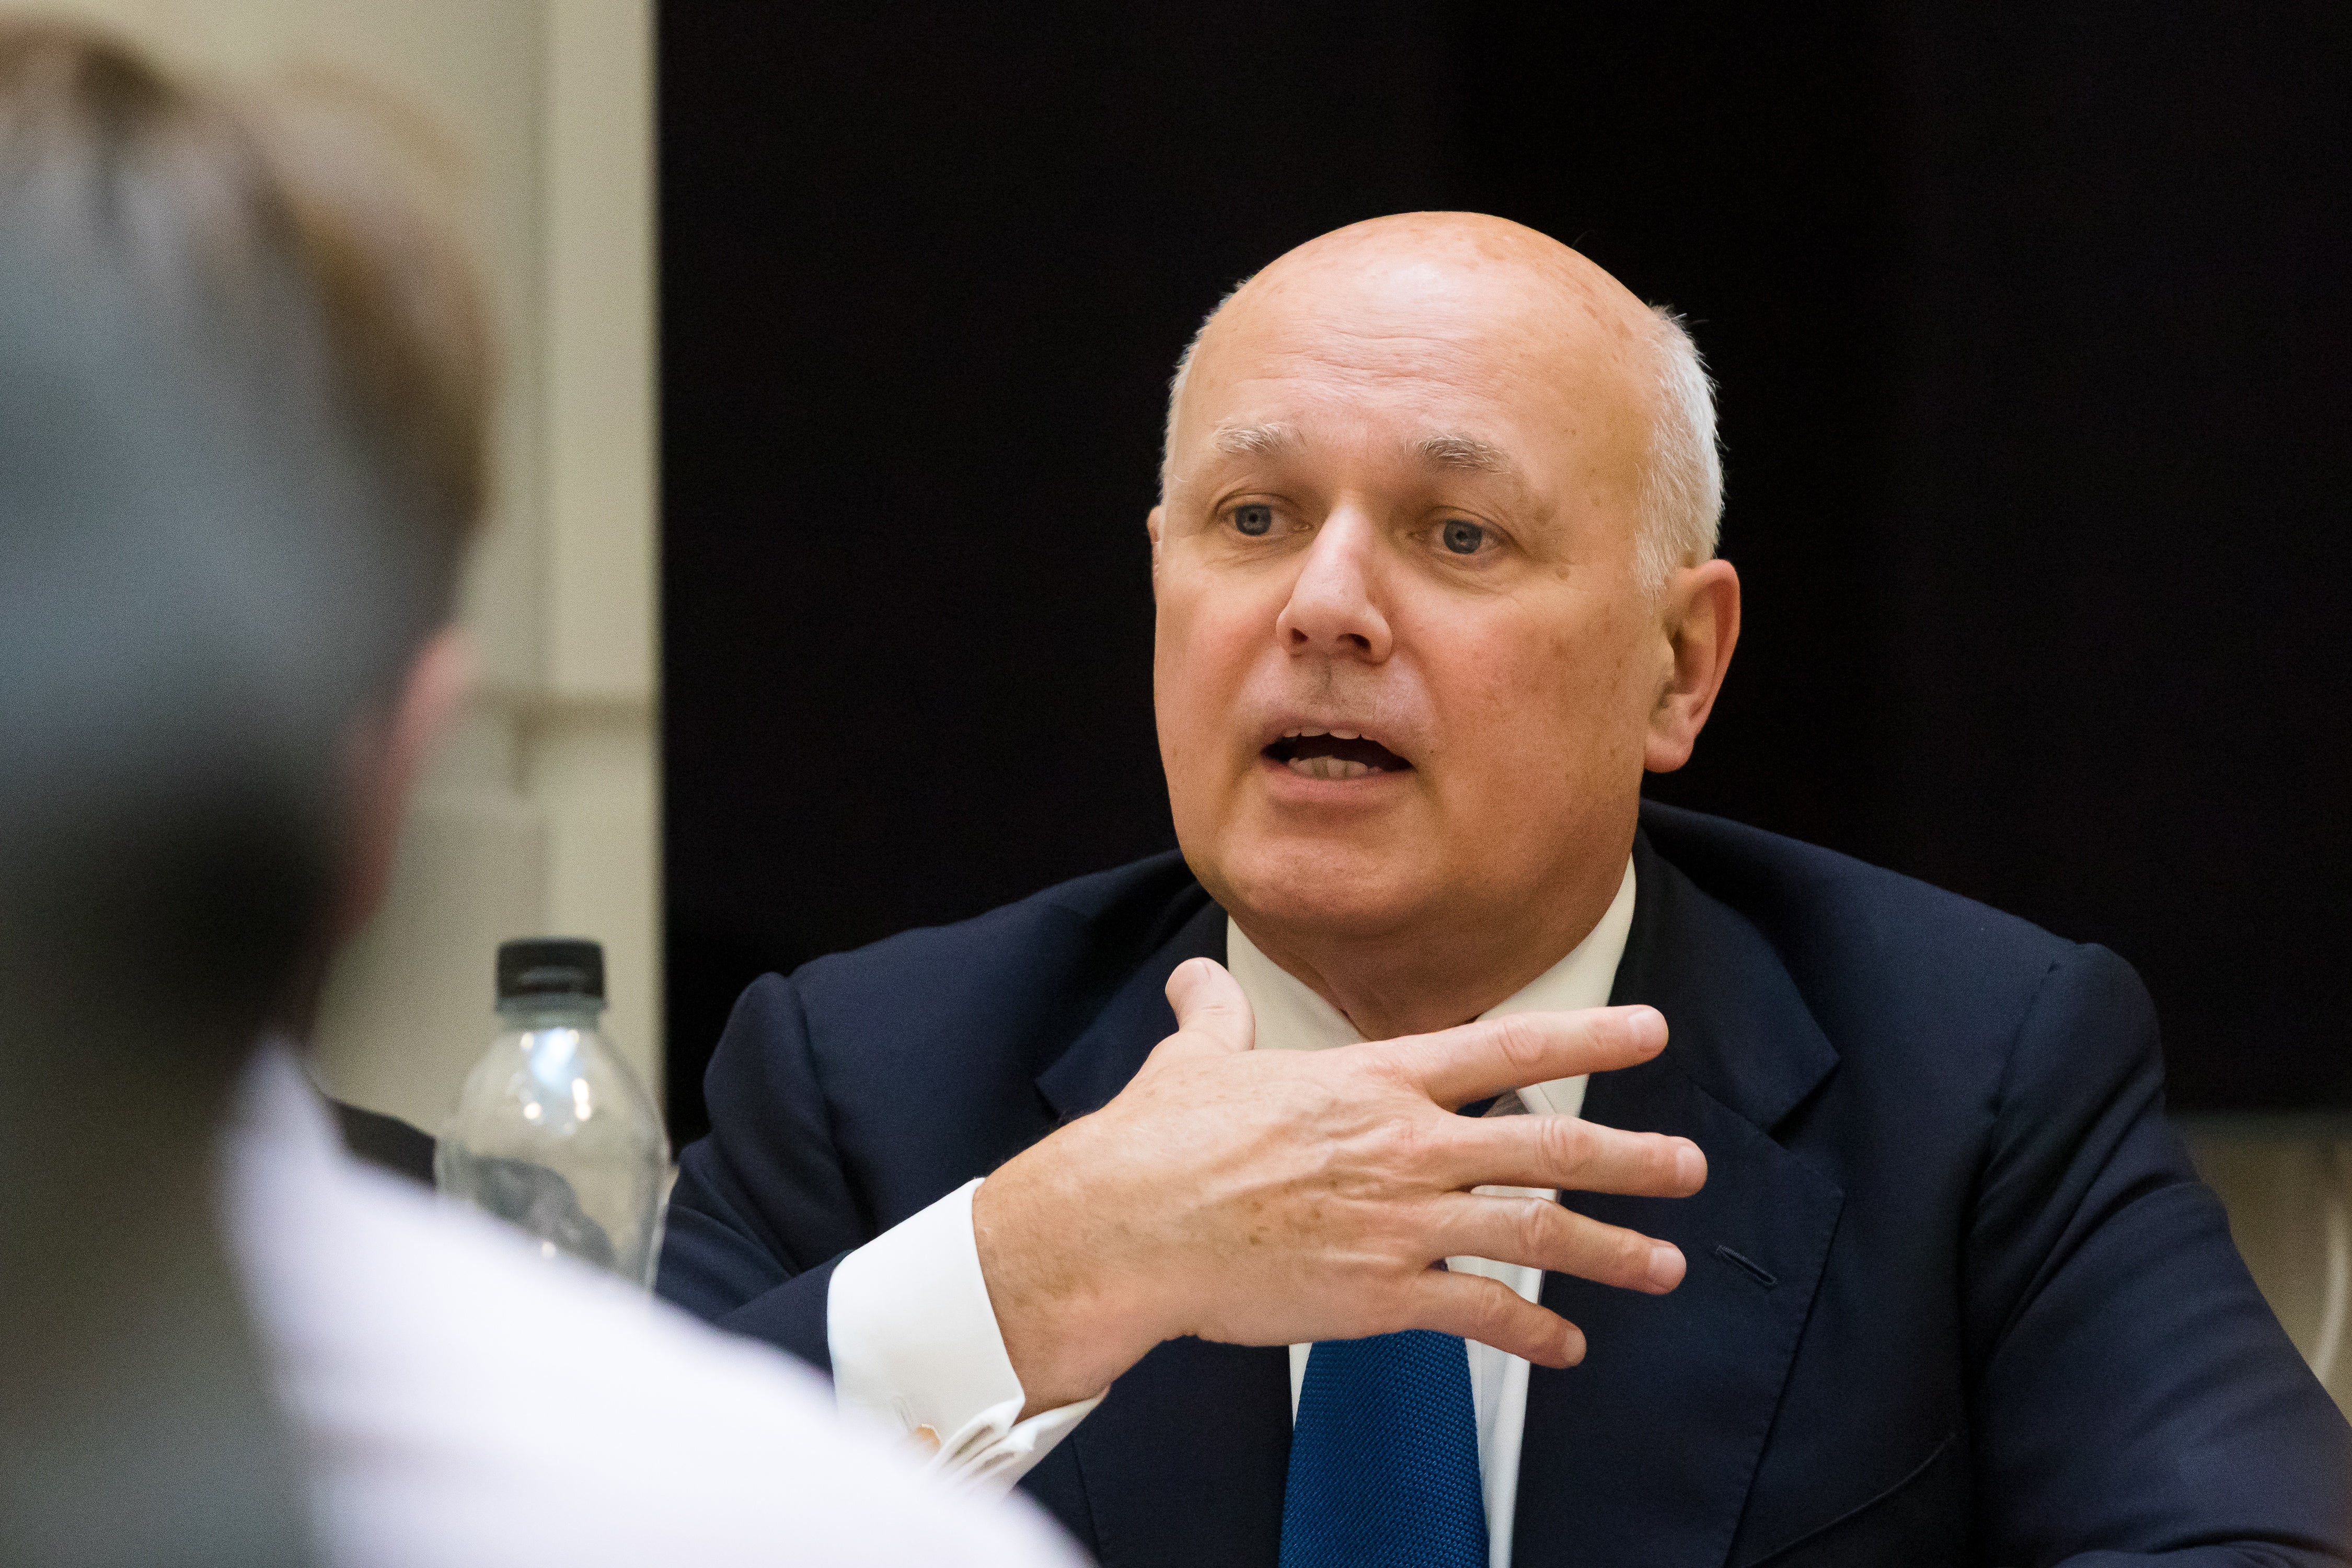 Iain Duncan Smith MP speaks at a press conference for the launch of the All-Party Parliamentary Group on Magnitsky Sanctions in London, Britain, 20 October 2021.